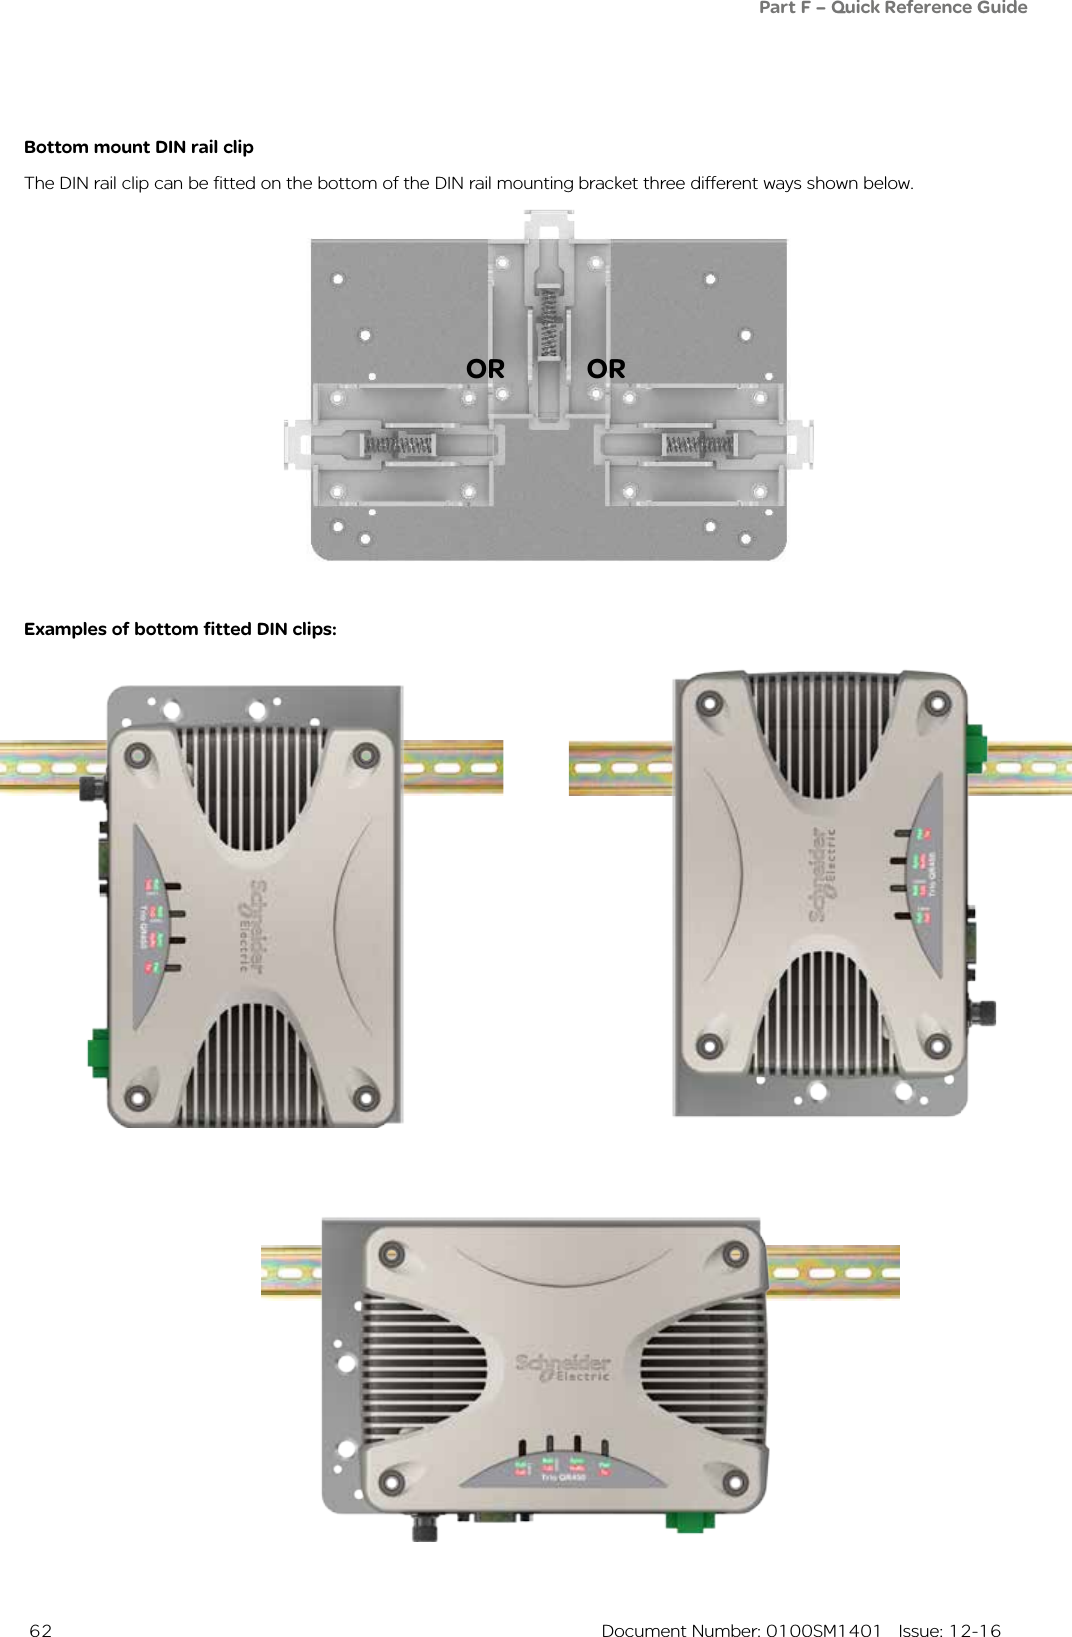  62  Document Number: 0100SM1401   Issue: 12-16Bottom mount DIN rail clipThe DIN rail clip can be fitted on the bottom of the DIN rail mounting bracket three different ways shown below.ORExamples of bottom fitted DIN clips:ORPart F – Quick Reference Guide